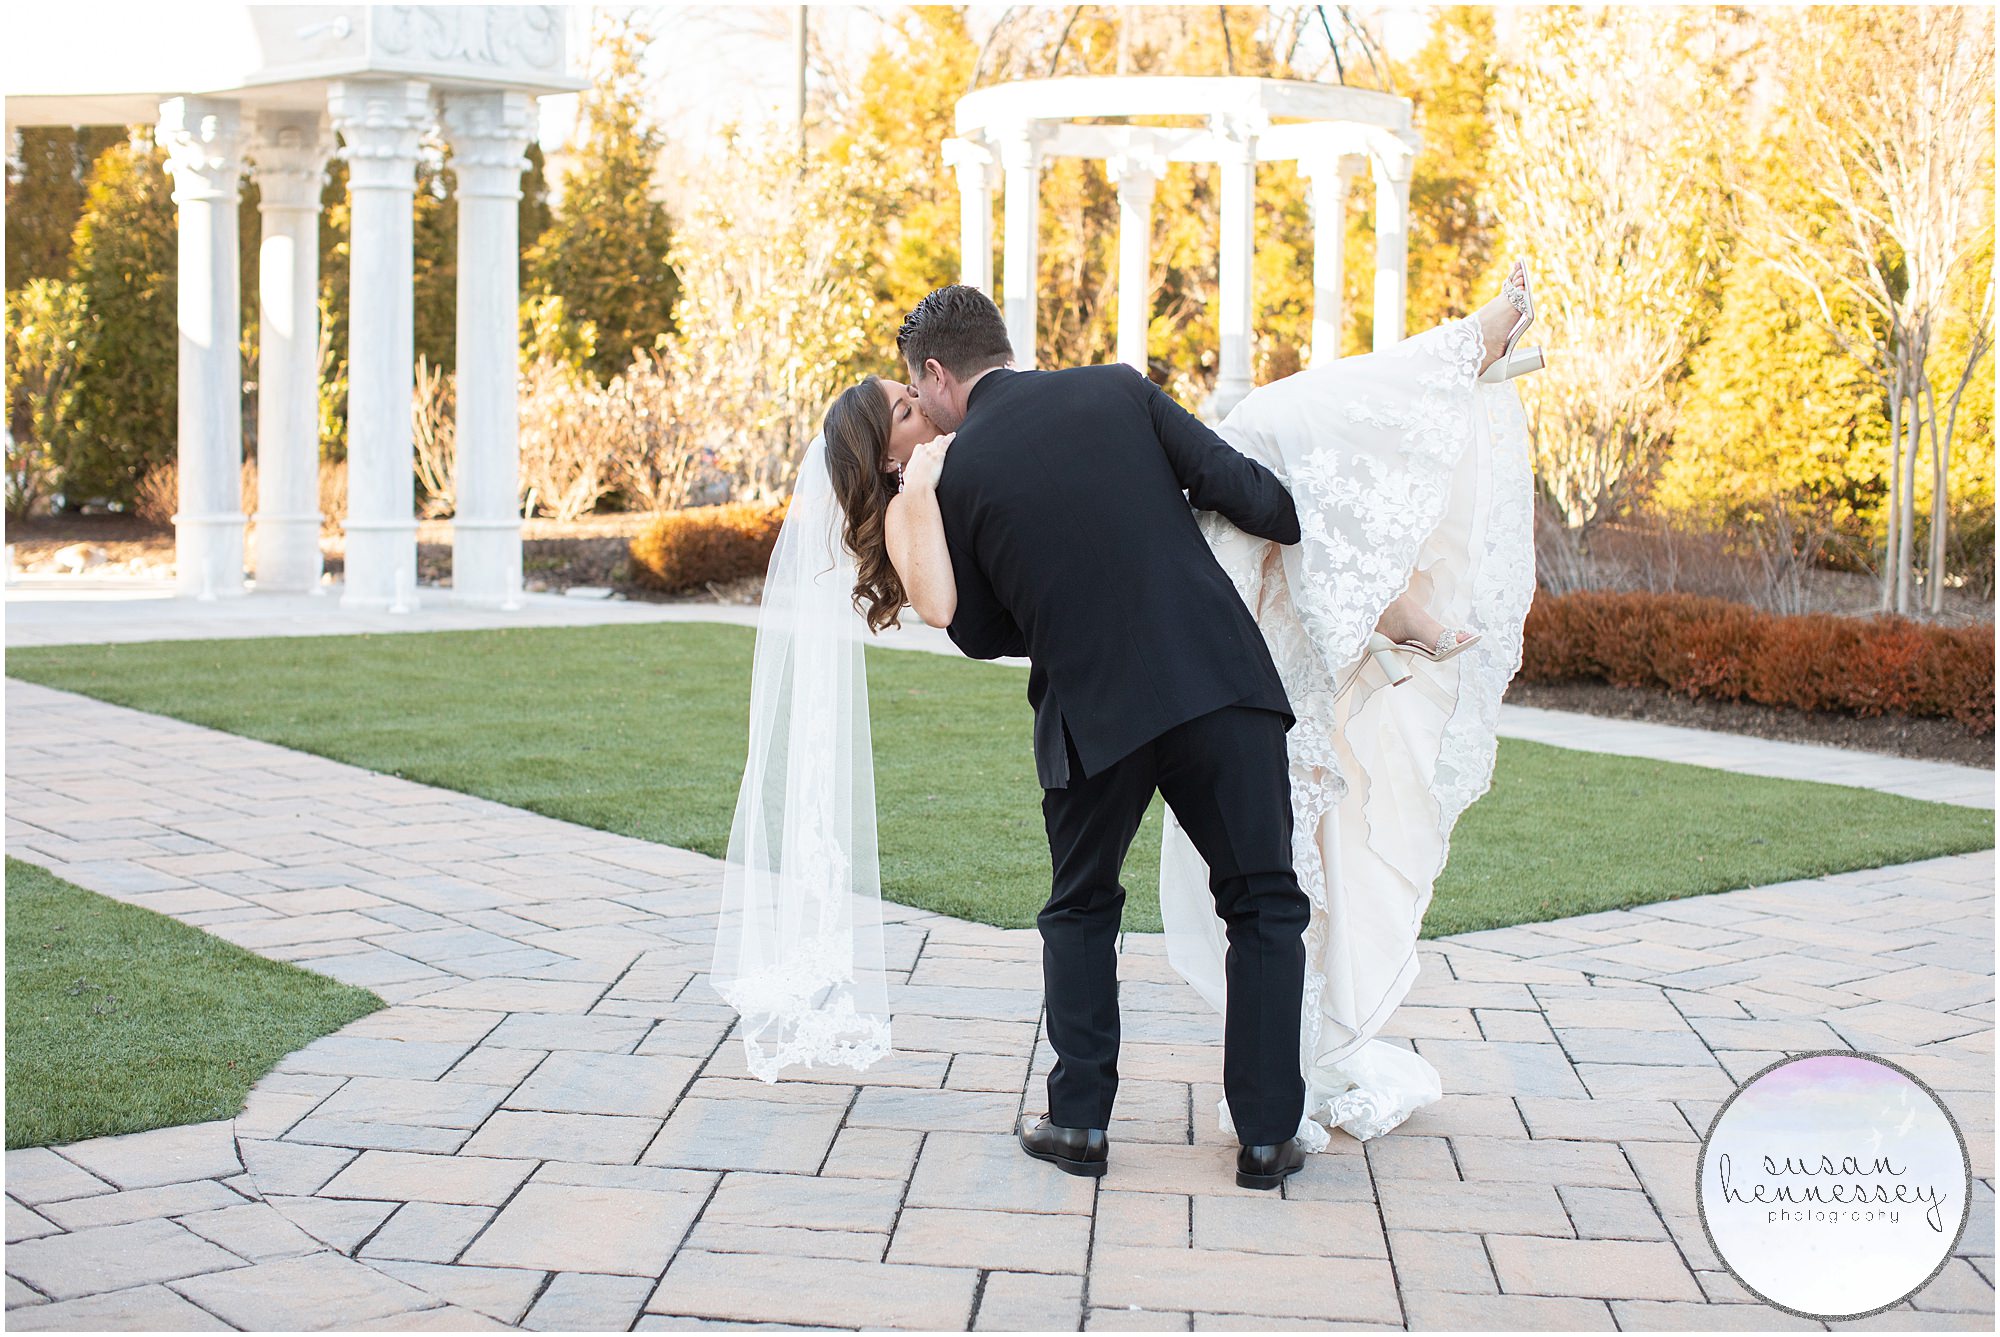 Winter wedding at the merion